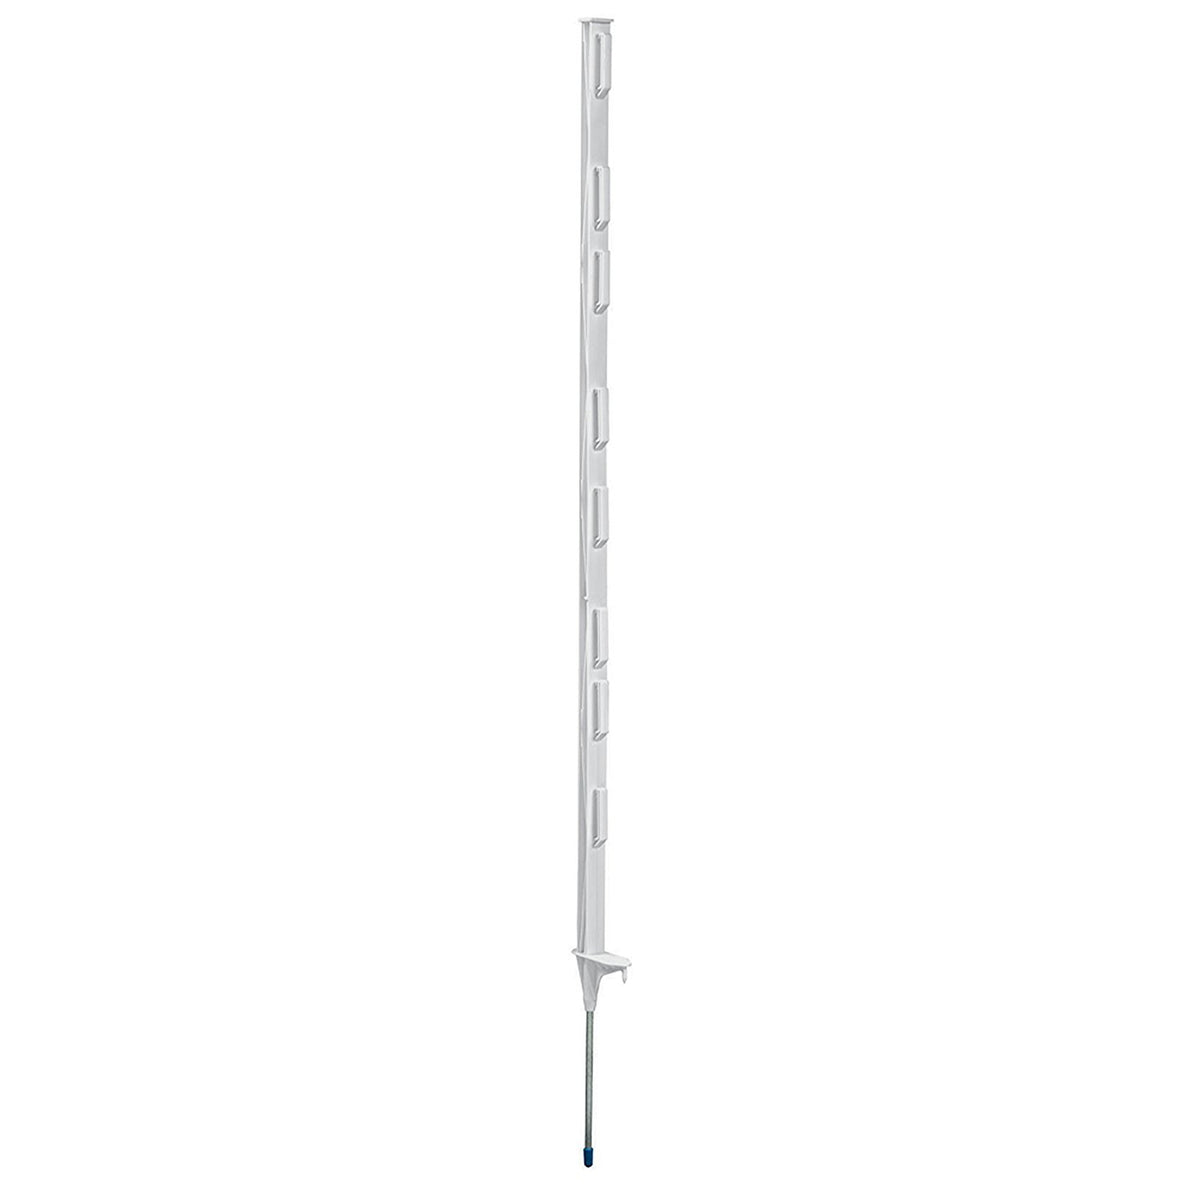 Fi-Shock A-48 Step-In Fence Post, 4'